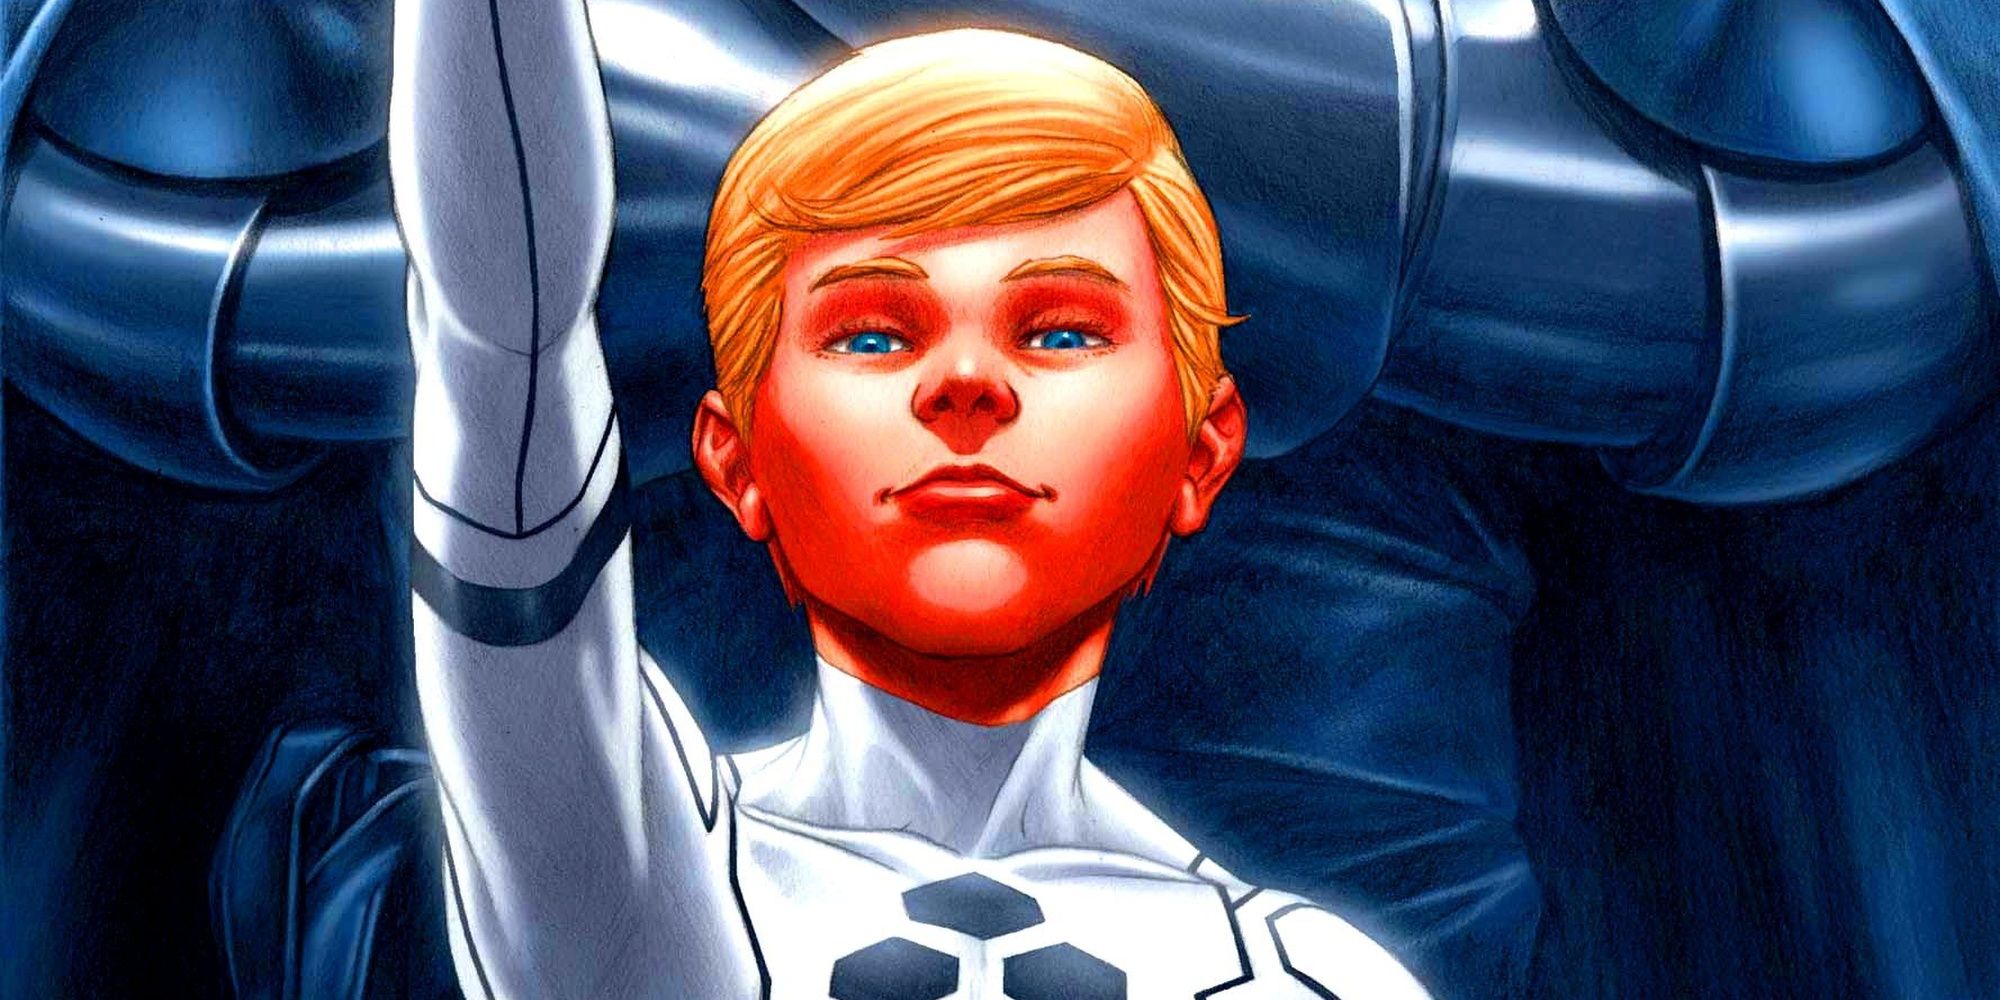 Franklin Richards of the Fantastic Four smiling and looking confident in his hero suit, one arm reaching up